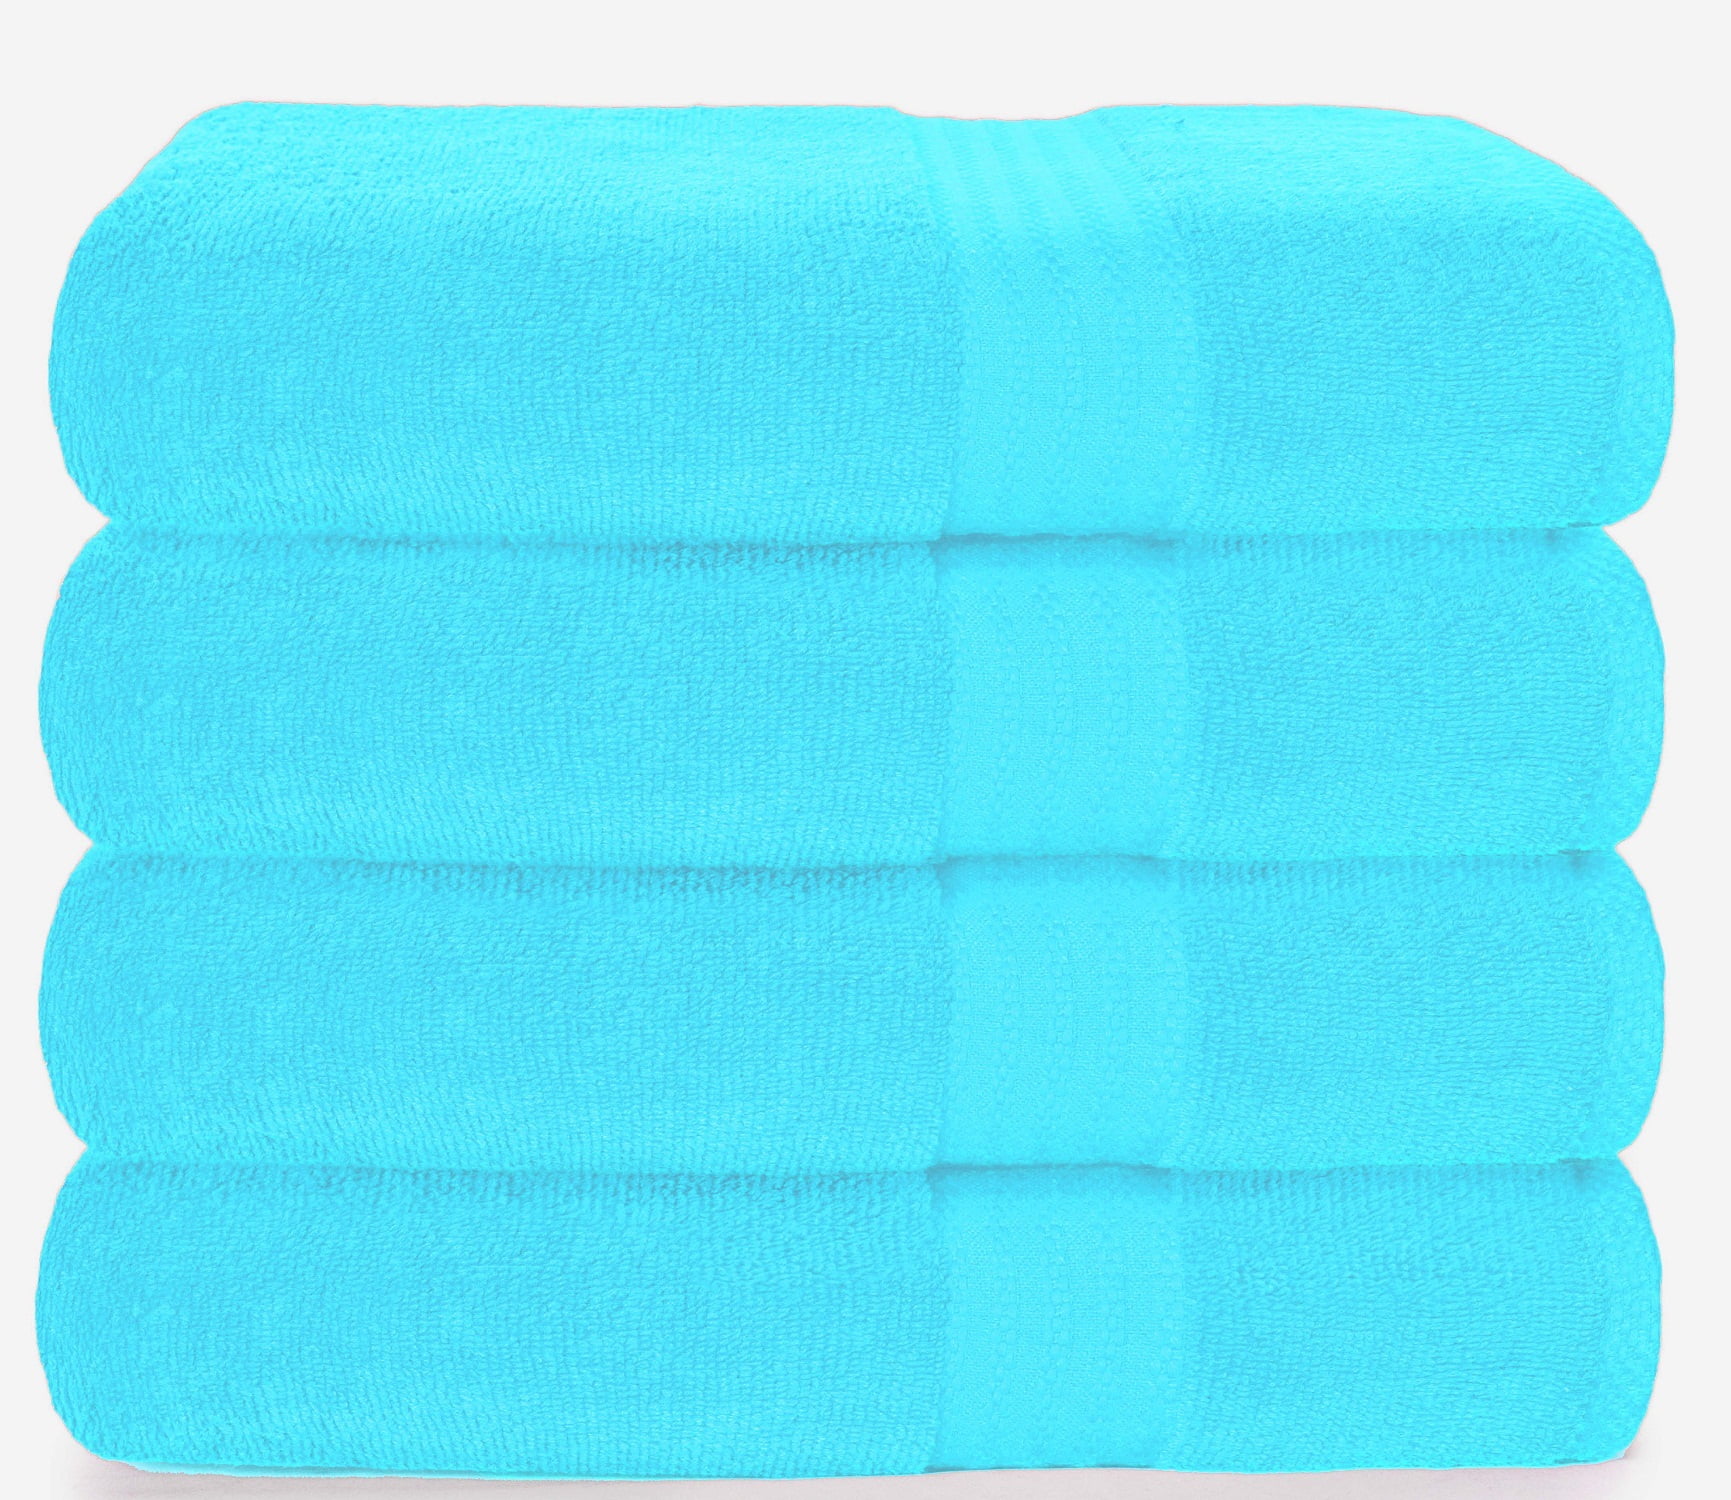 Details about   High Quality Cotton Waffle Bath Towels For Adult Soft Absorbent Towel 